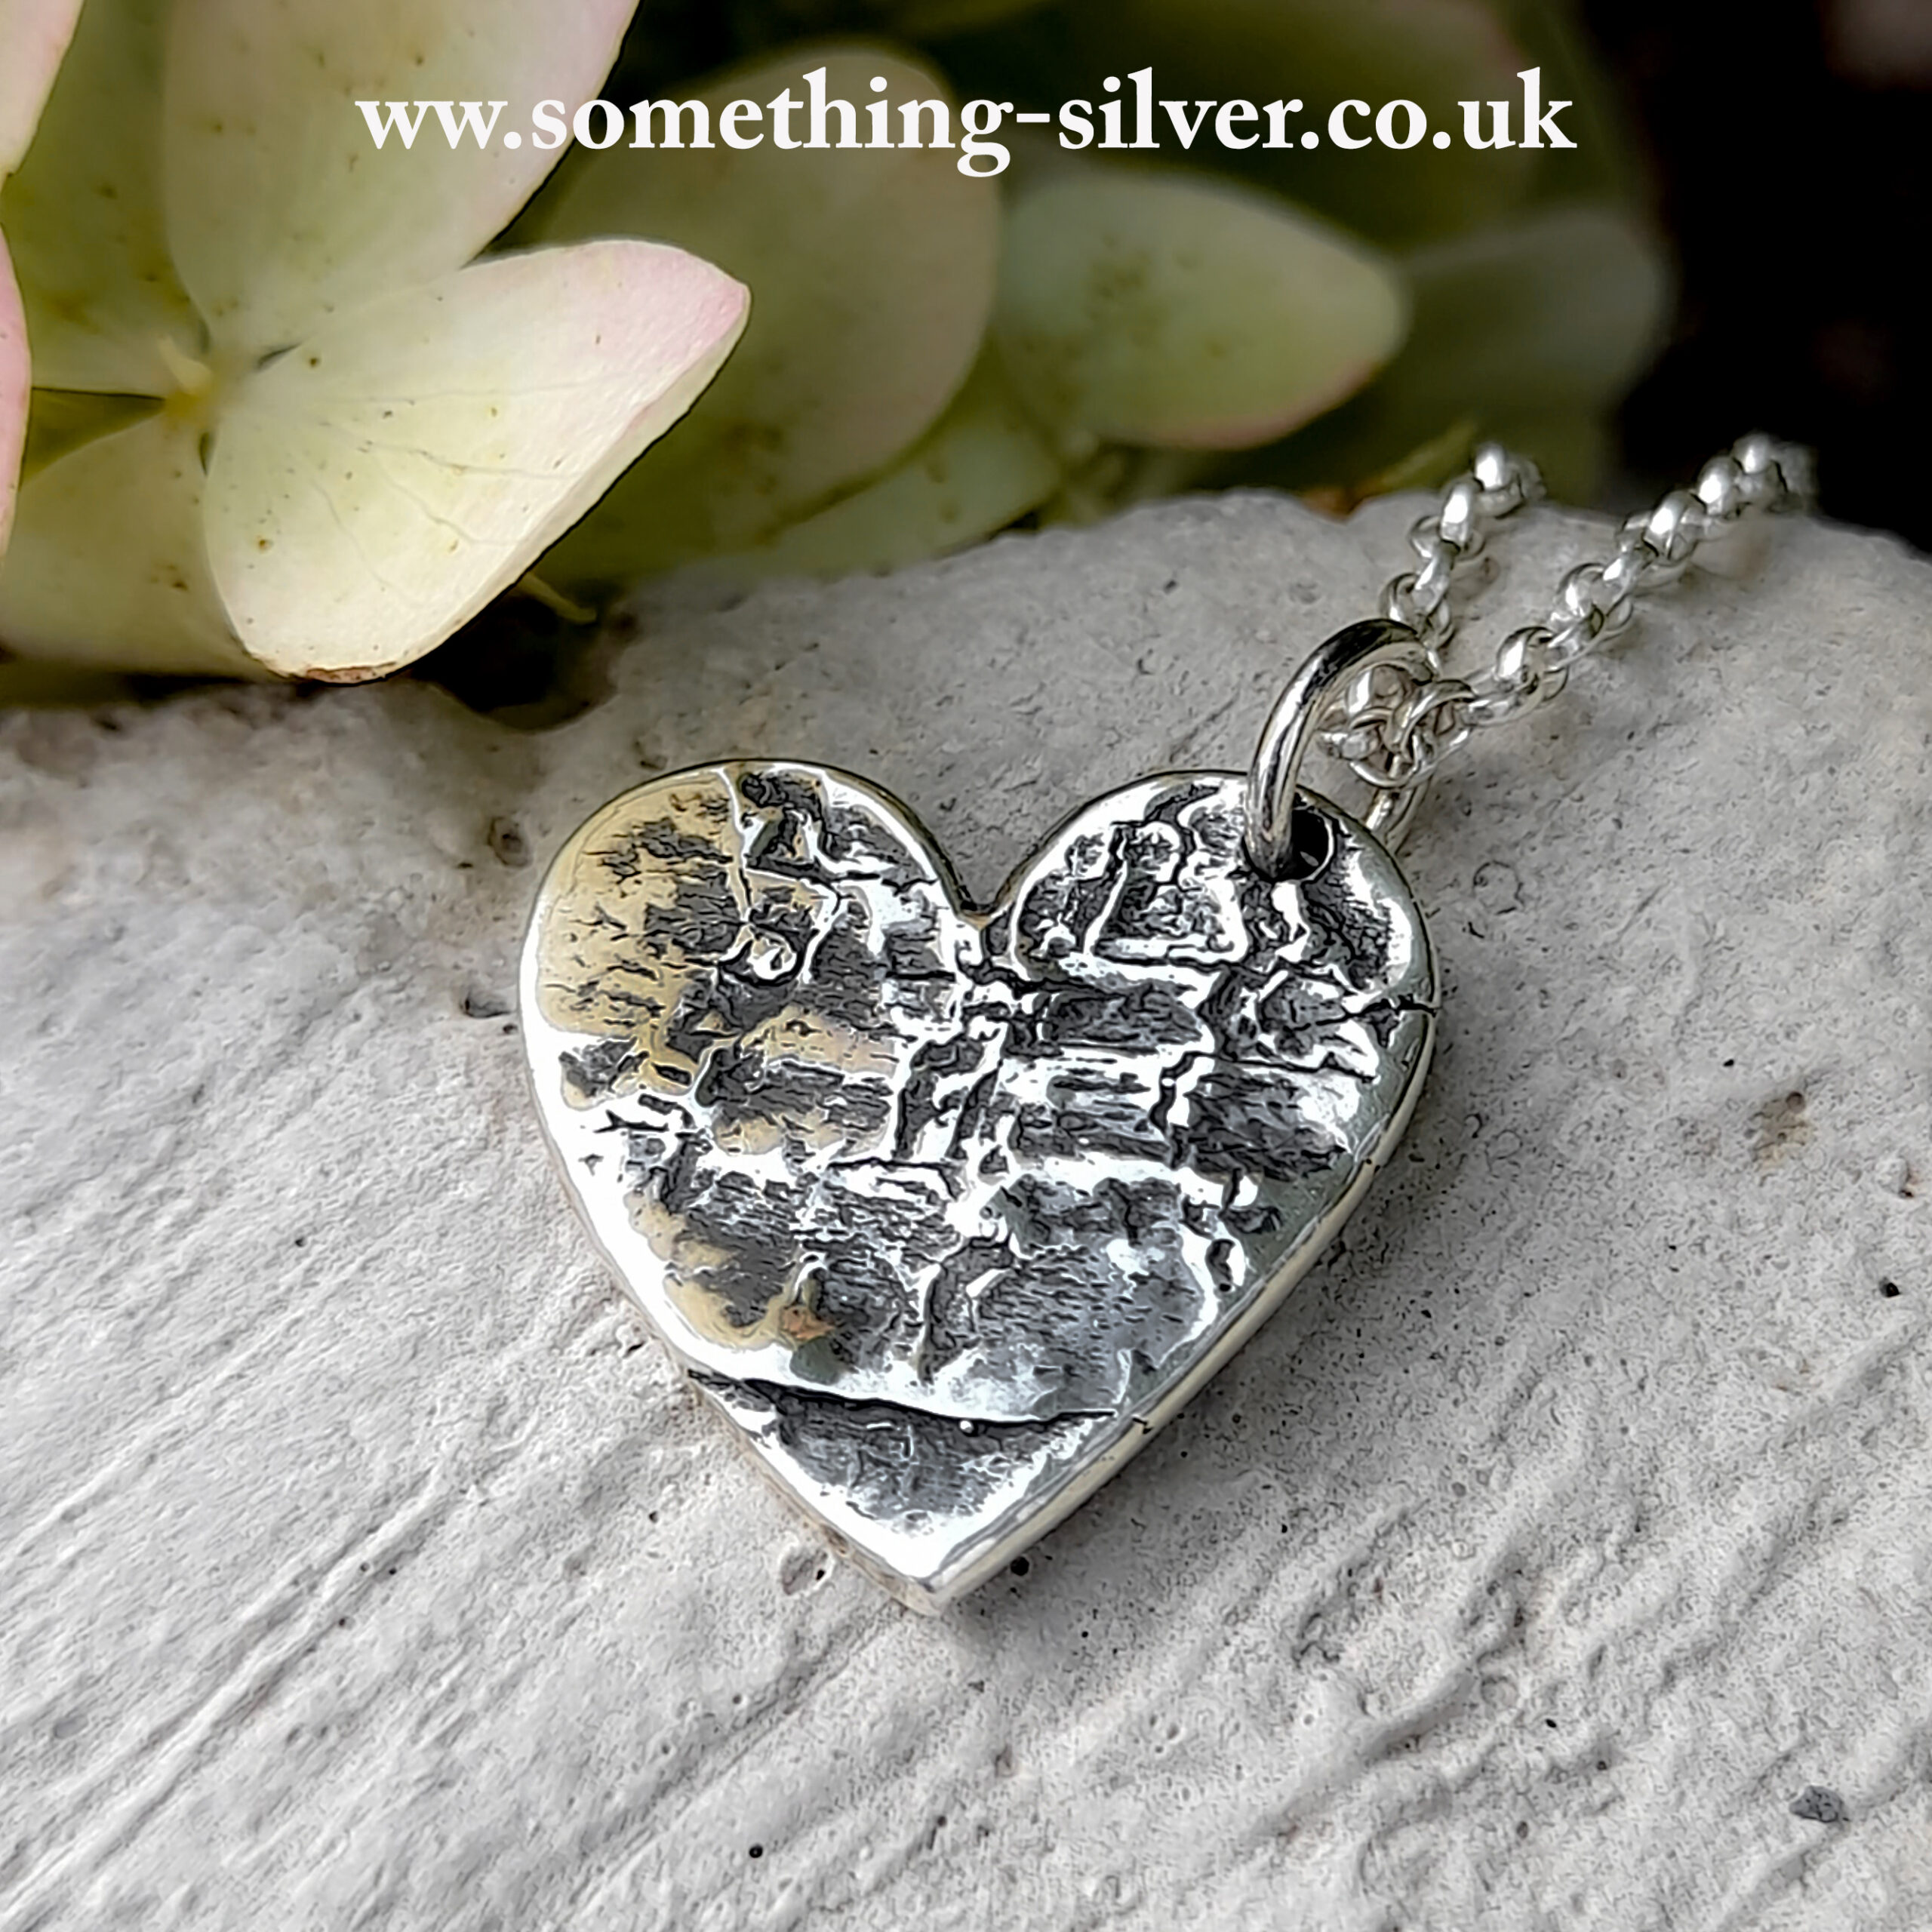 Buy Silver Solid Heart Pendant Necklace Online - Accessorize India